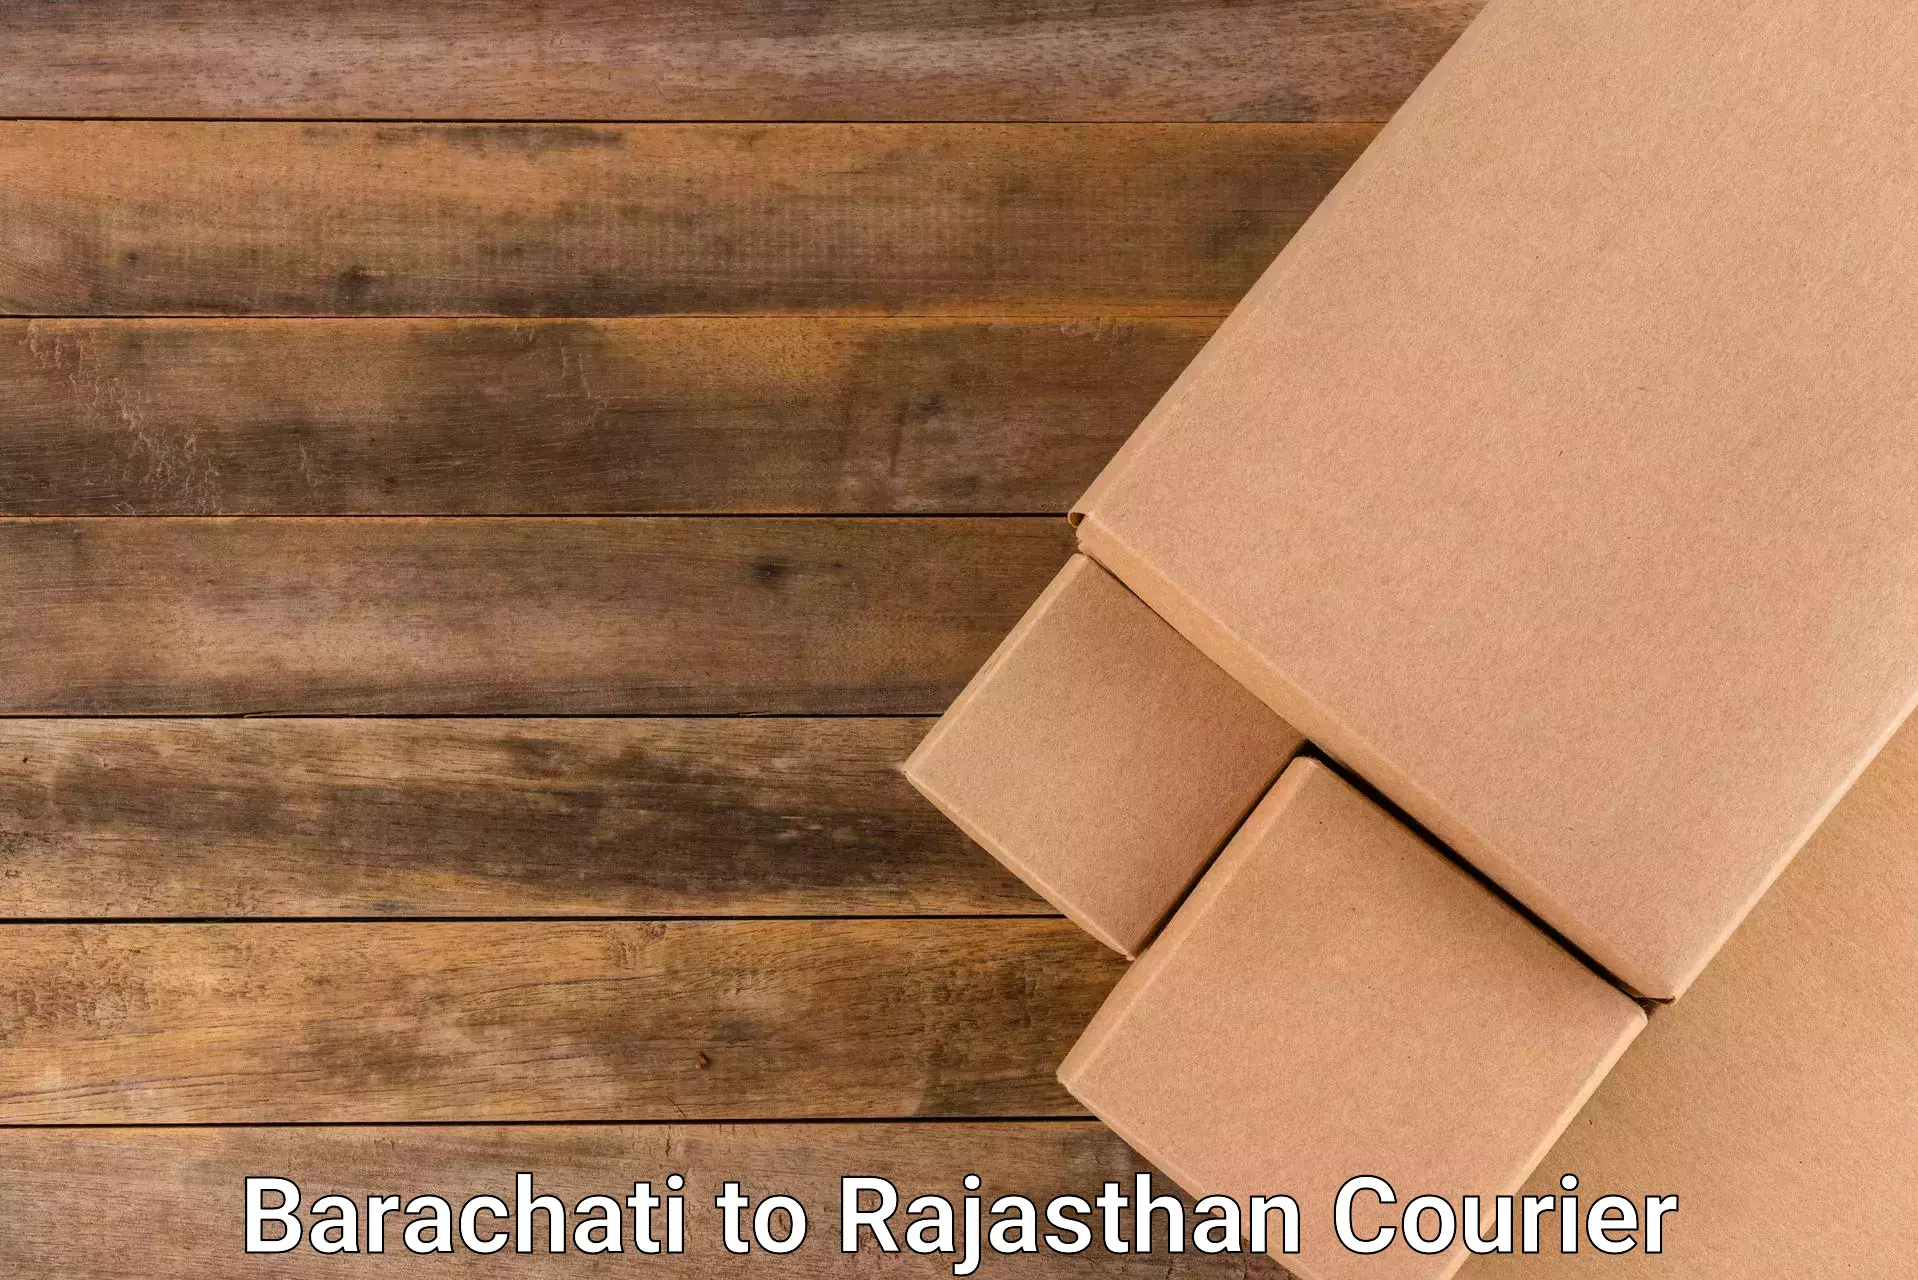 Enhanced tracking features Barachati to Rajasthan